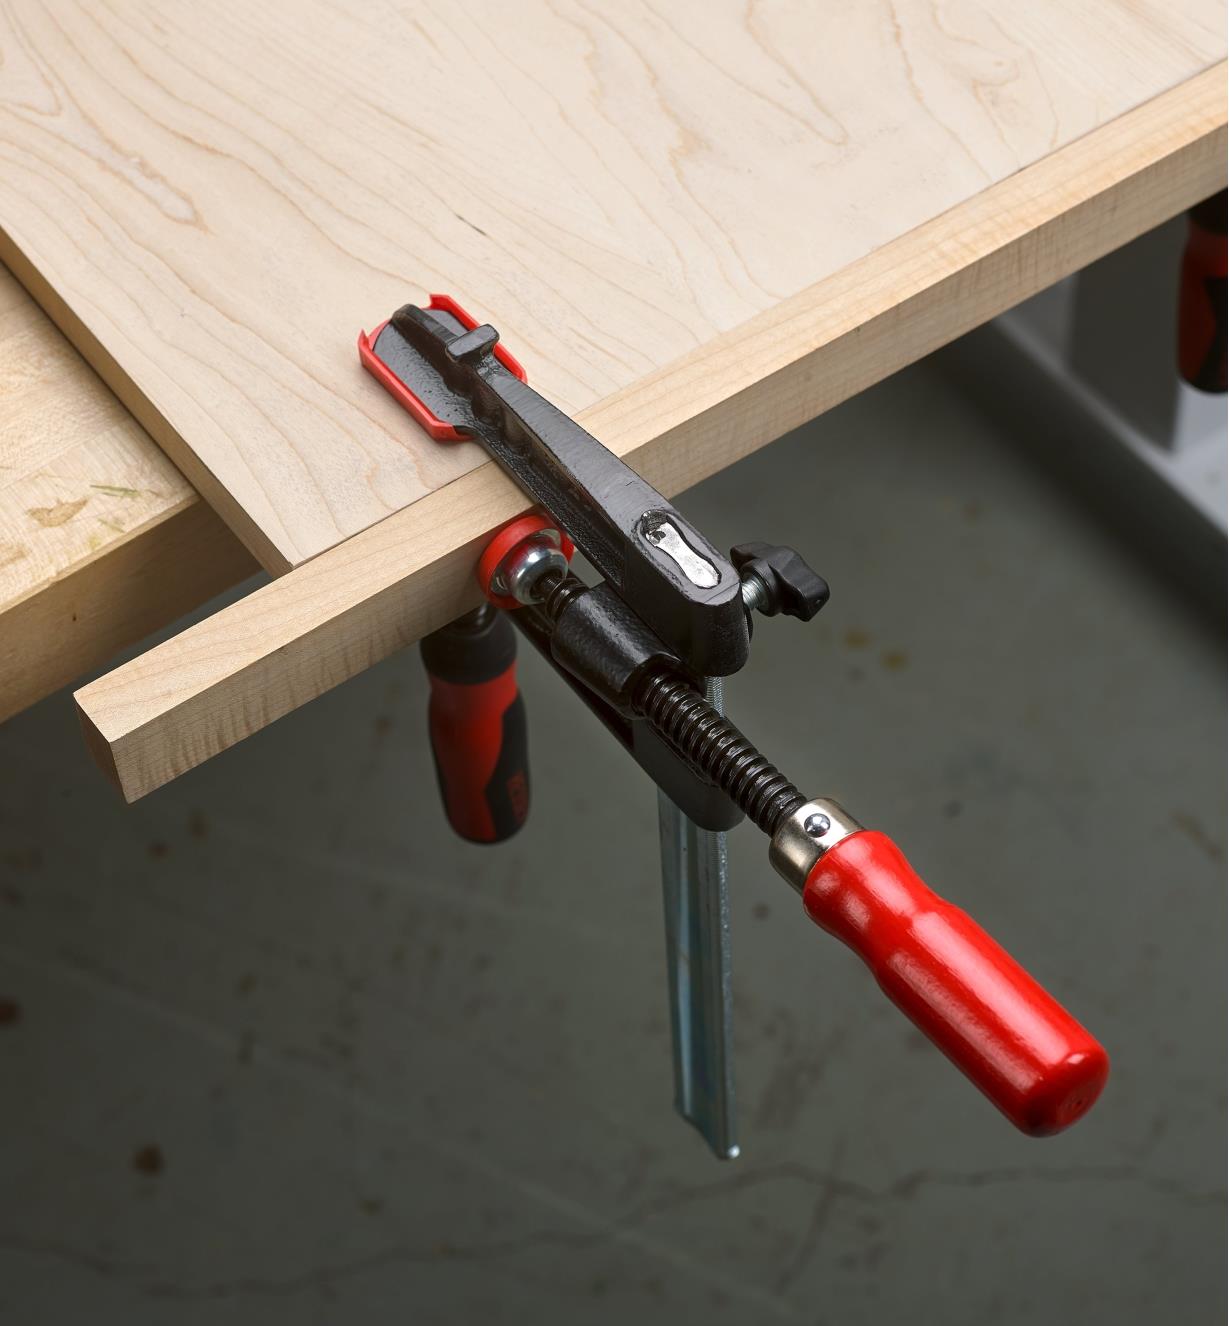 A Bessey single-spindle edge clamp connected to a Bessey fast-acting clamp, holding a strip of wood to the edge of a panel